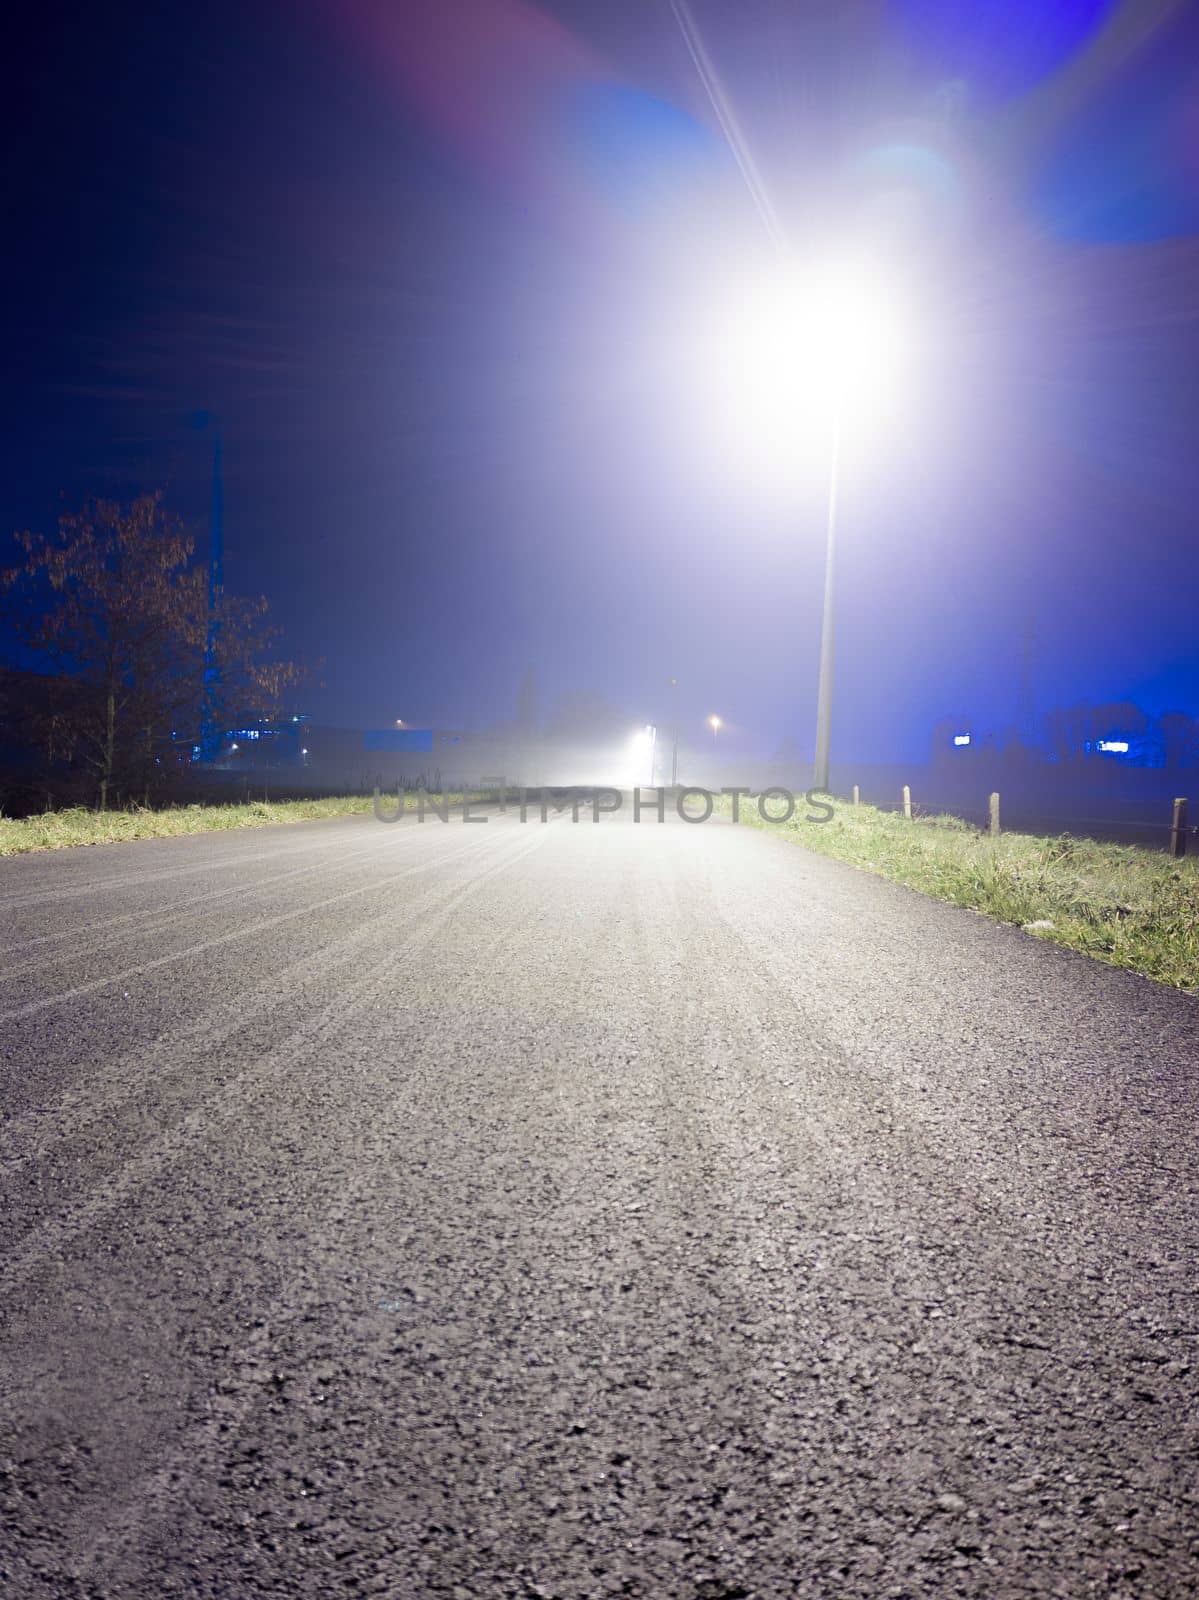 low angle view on a empty bicyclepath at night with a lighting streetlight and lensflare